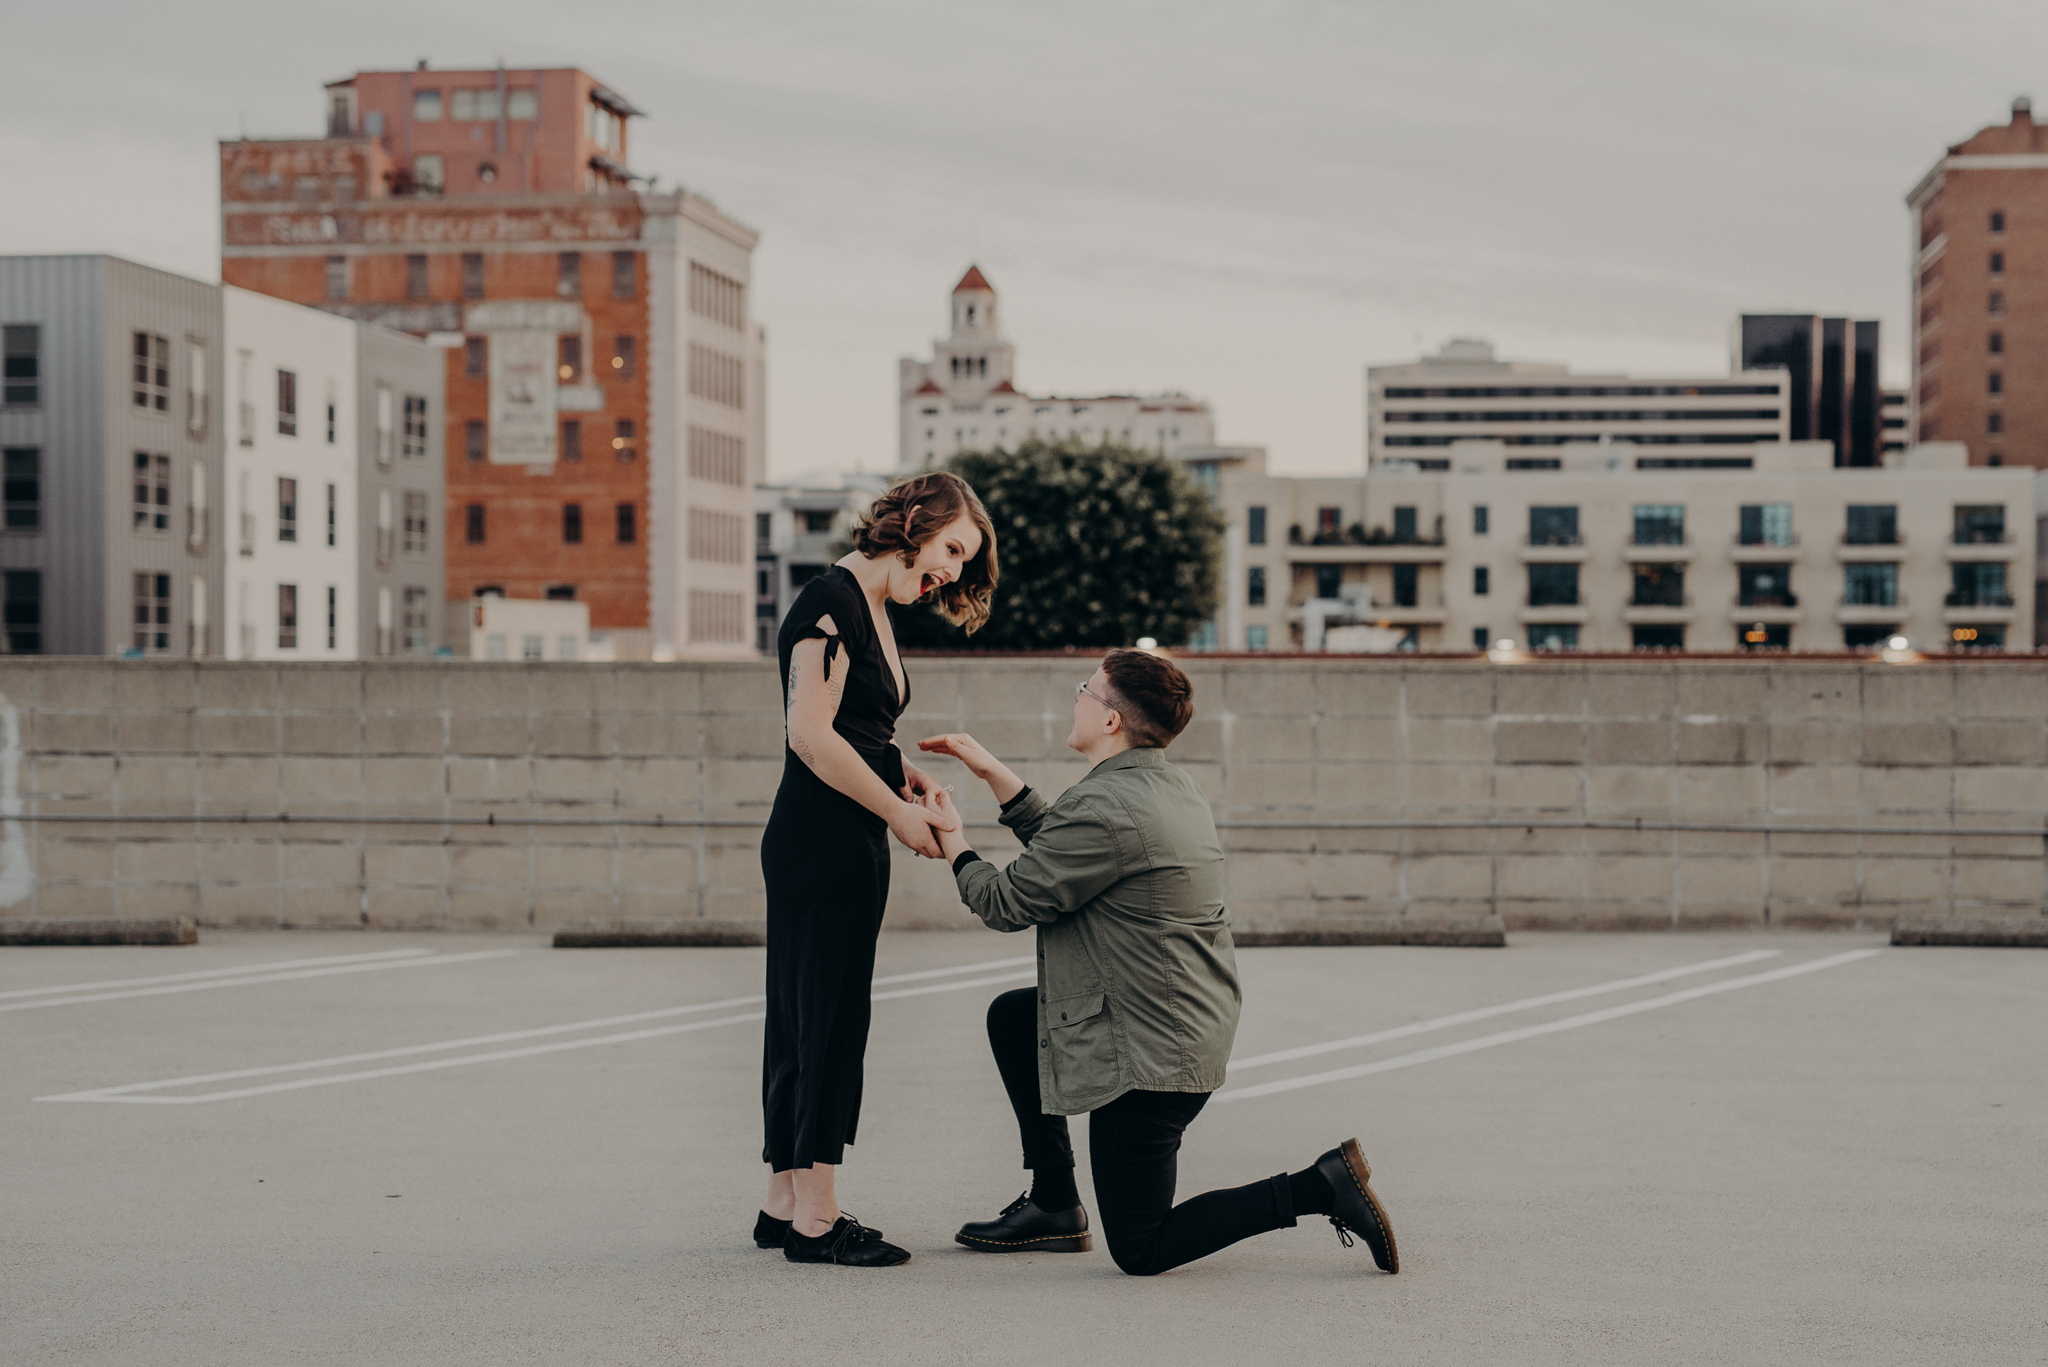 LGBTQ wedding photographer in los angeles - long beach engagement session - isaiahandtaylor.com-47.jpg